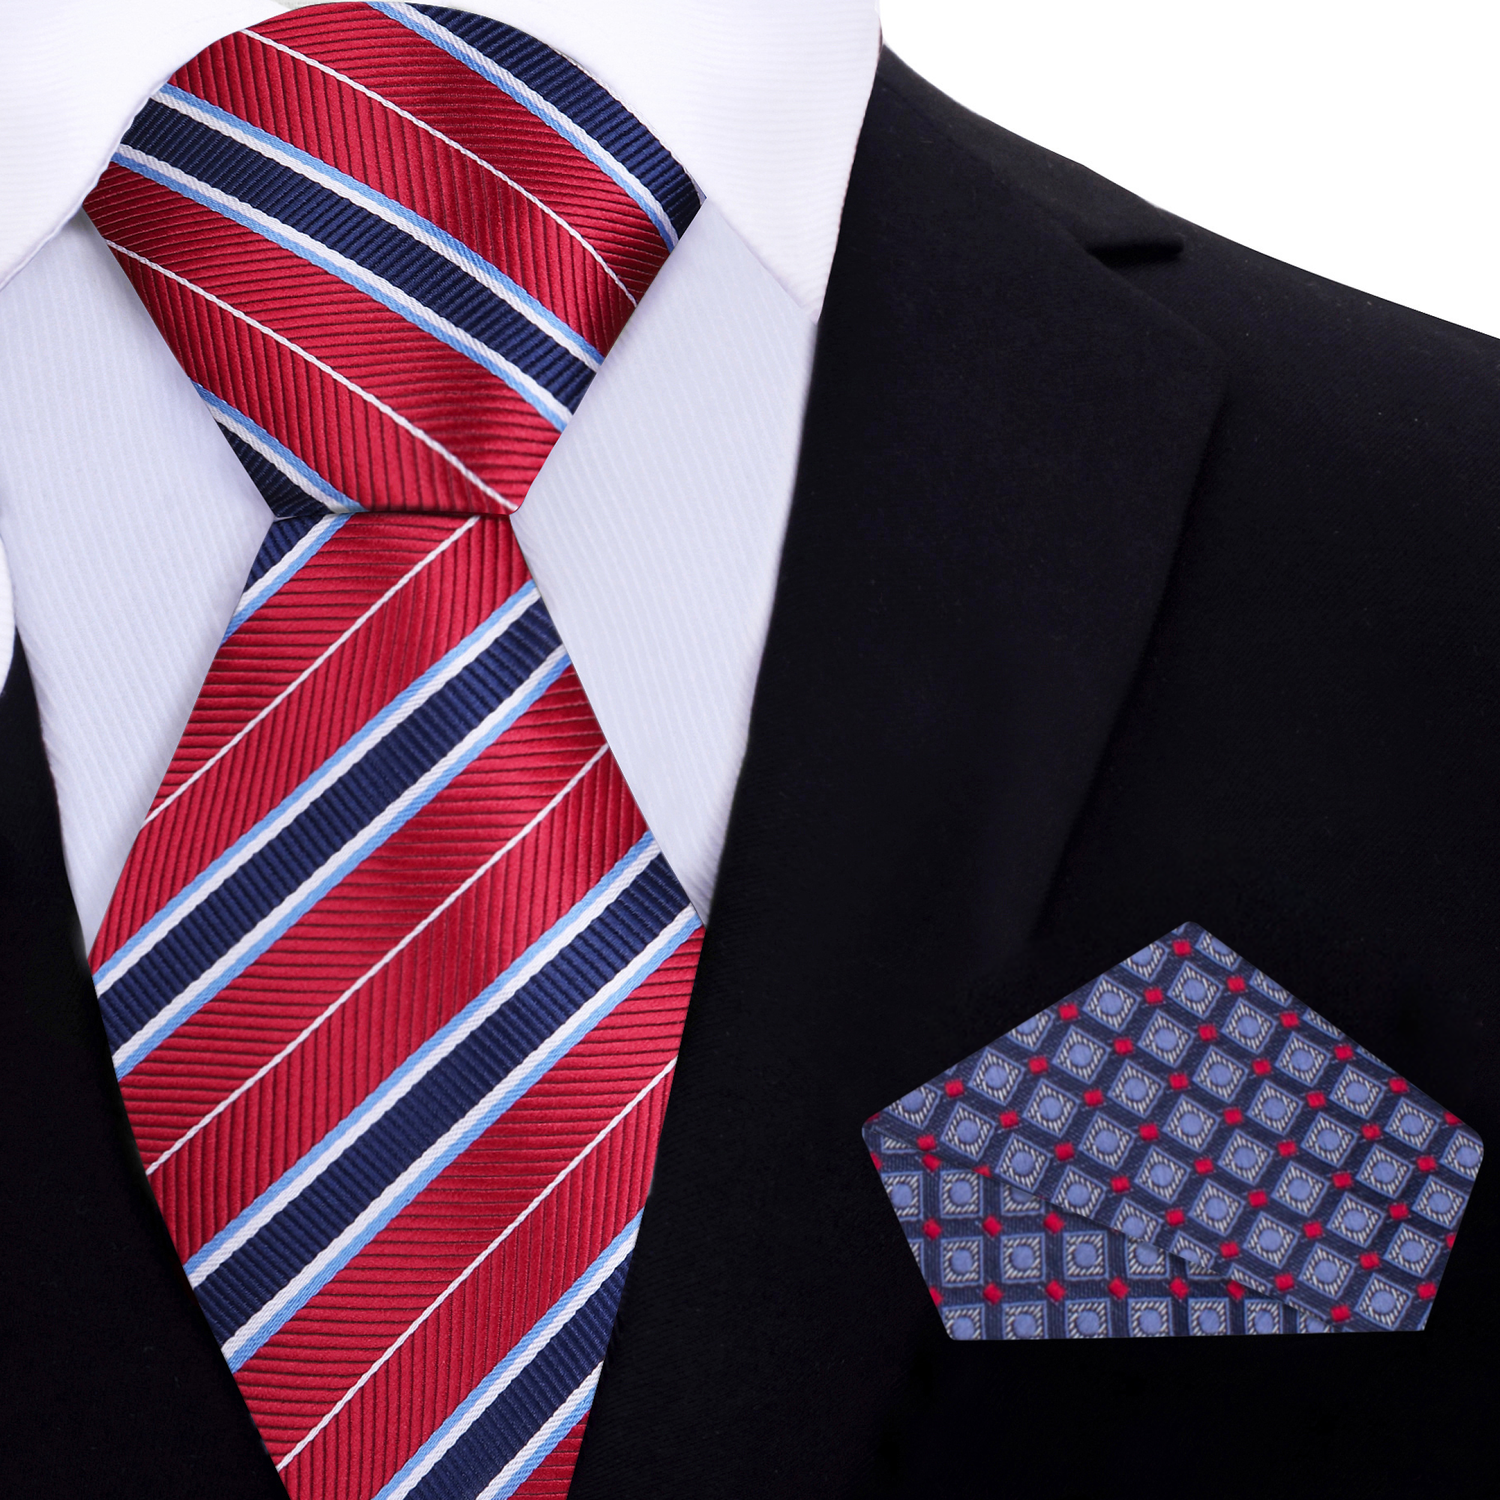 Red, Blue Stripe Necktie with Blue, Red Geometric Pocket Square